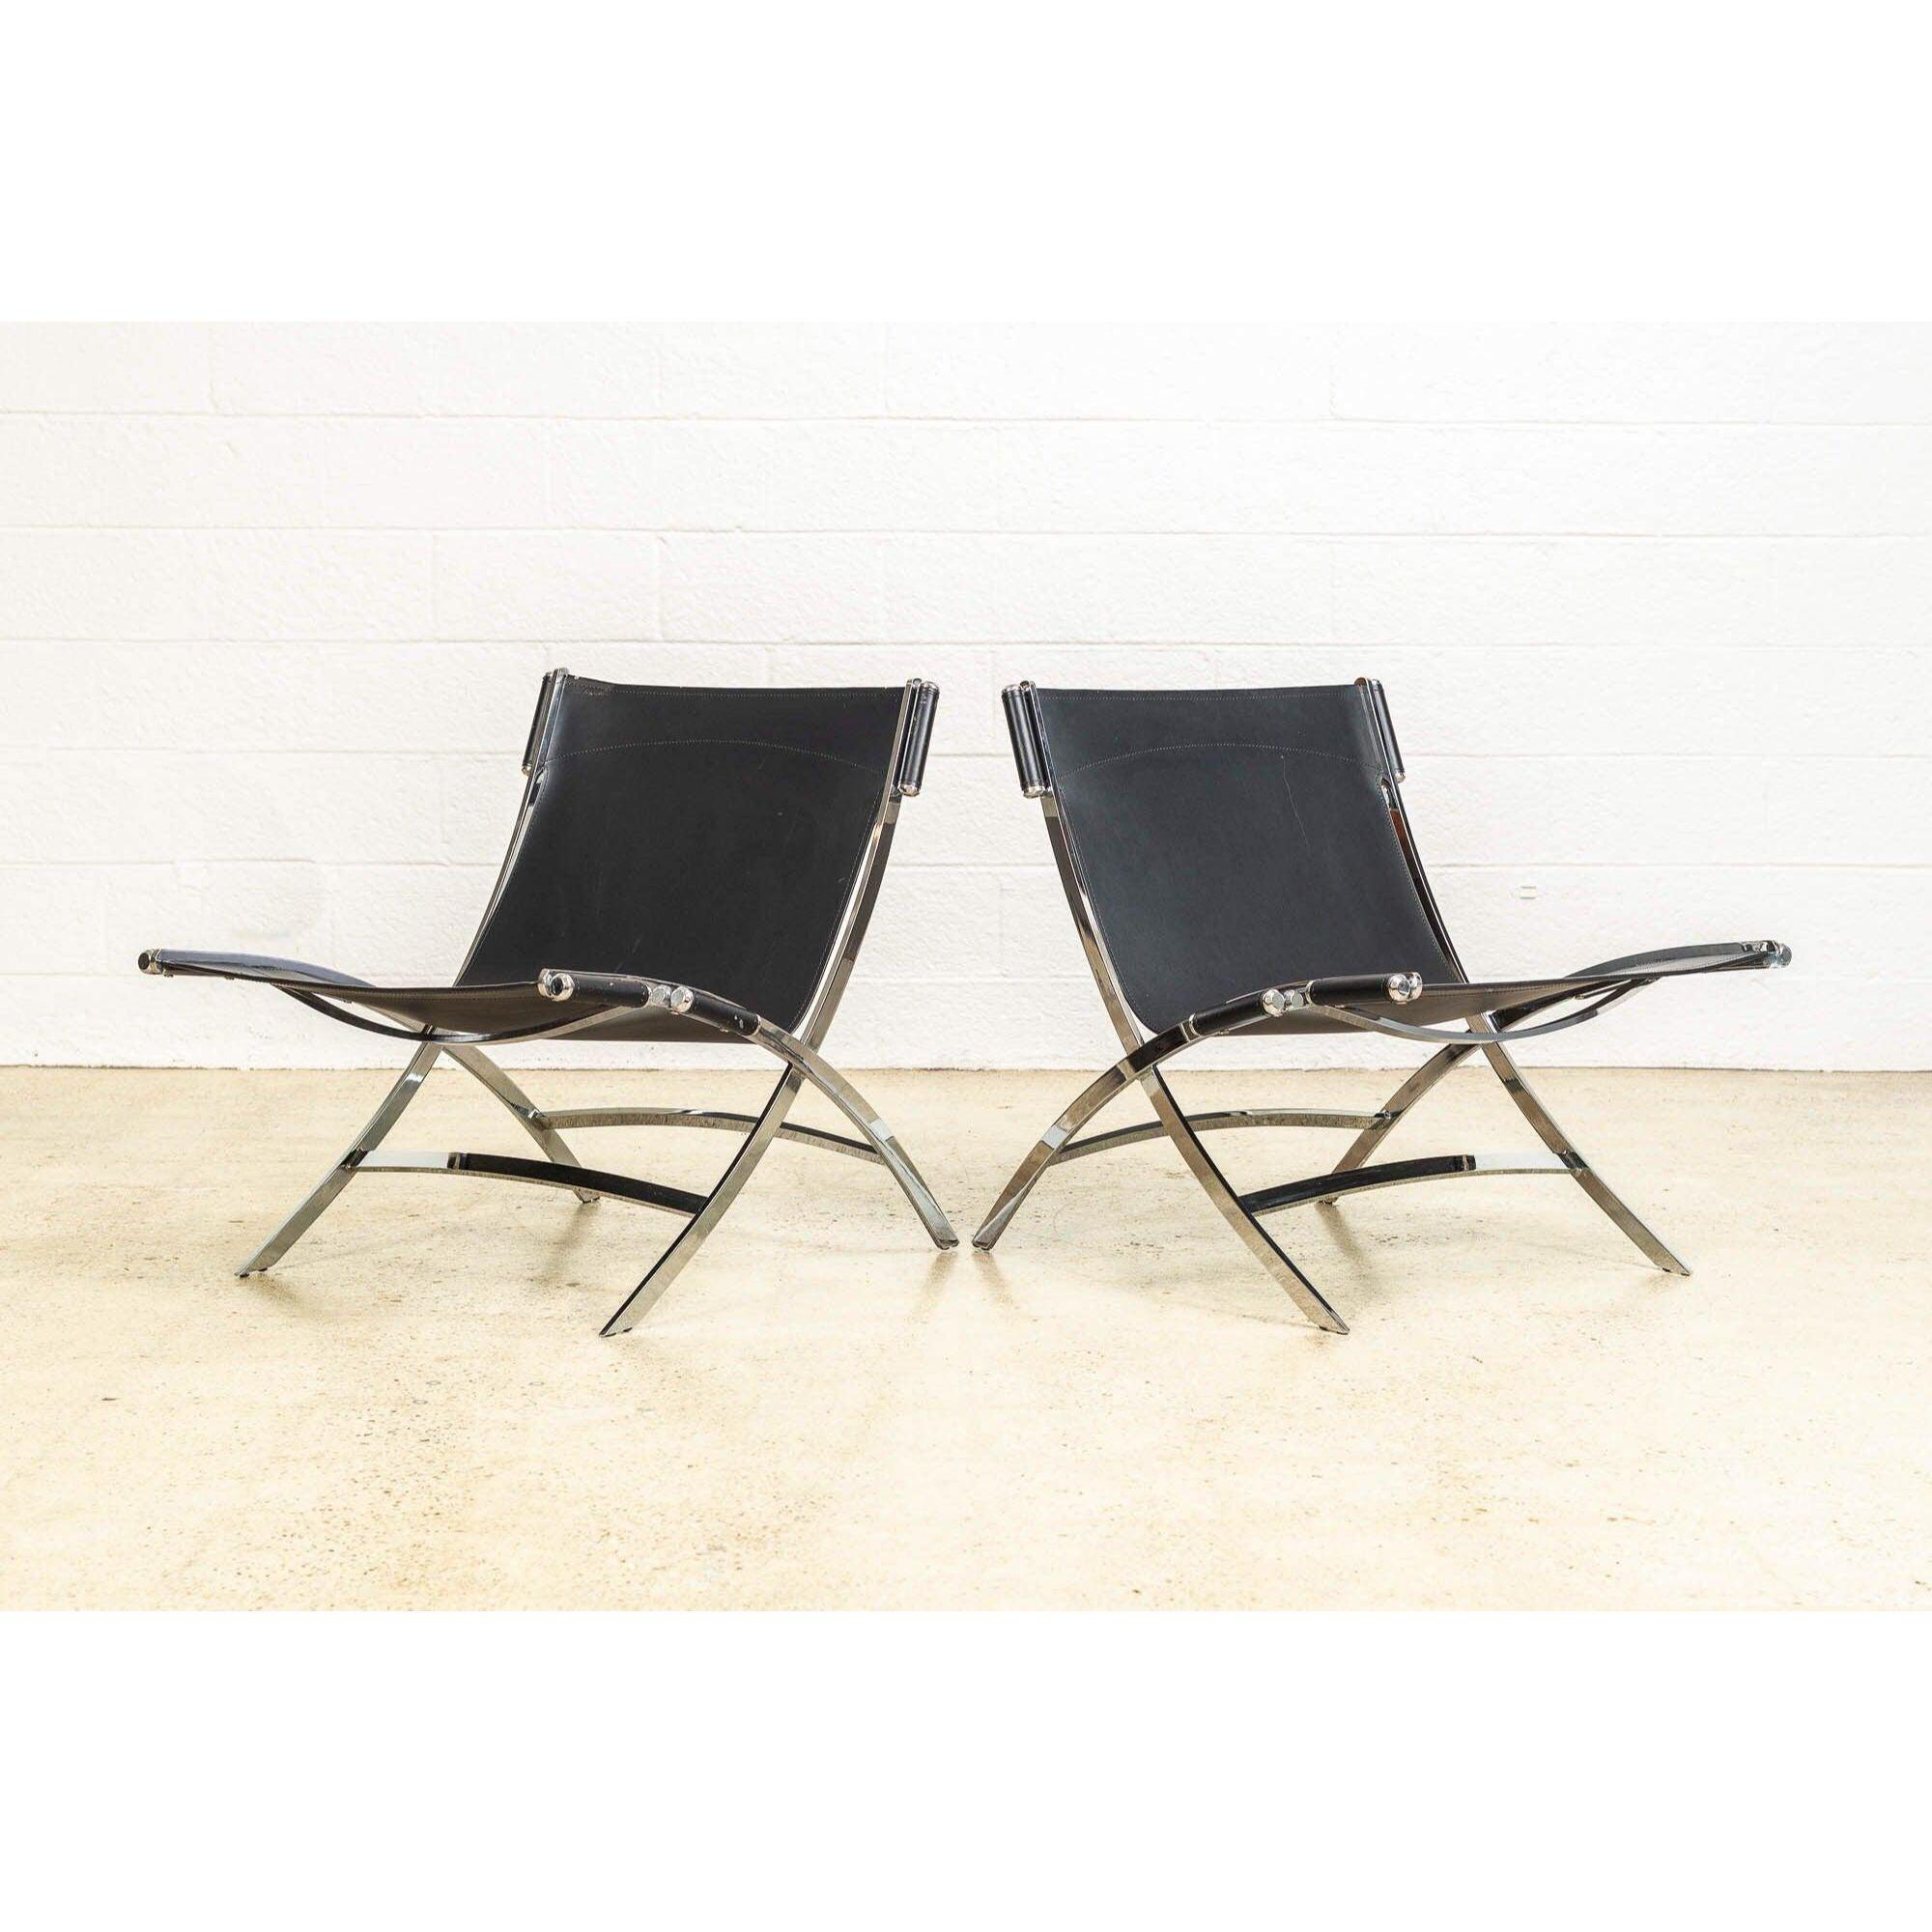 This exceptional pair of vintage Antonio Citterio for Flexform “Timeless” chrome & black leather lounge chairs are a sleek, postmodern interpretation of classic Mid-Century Modern style. Impeccably constructed, the chairs are heavy and substantial